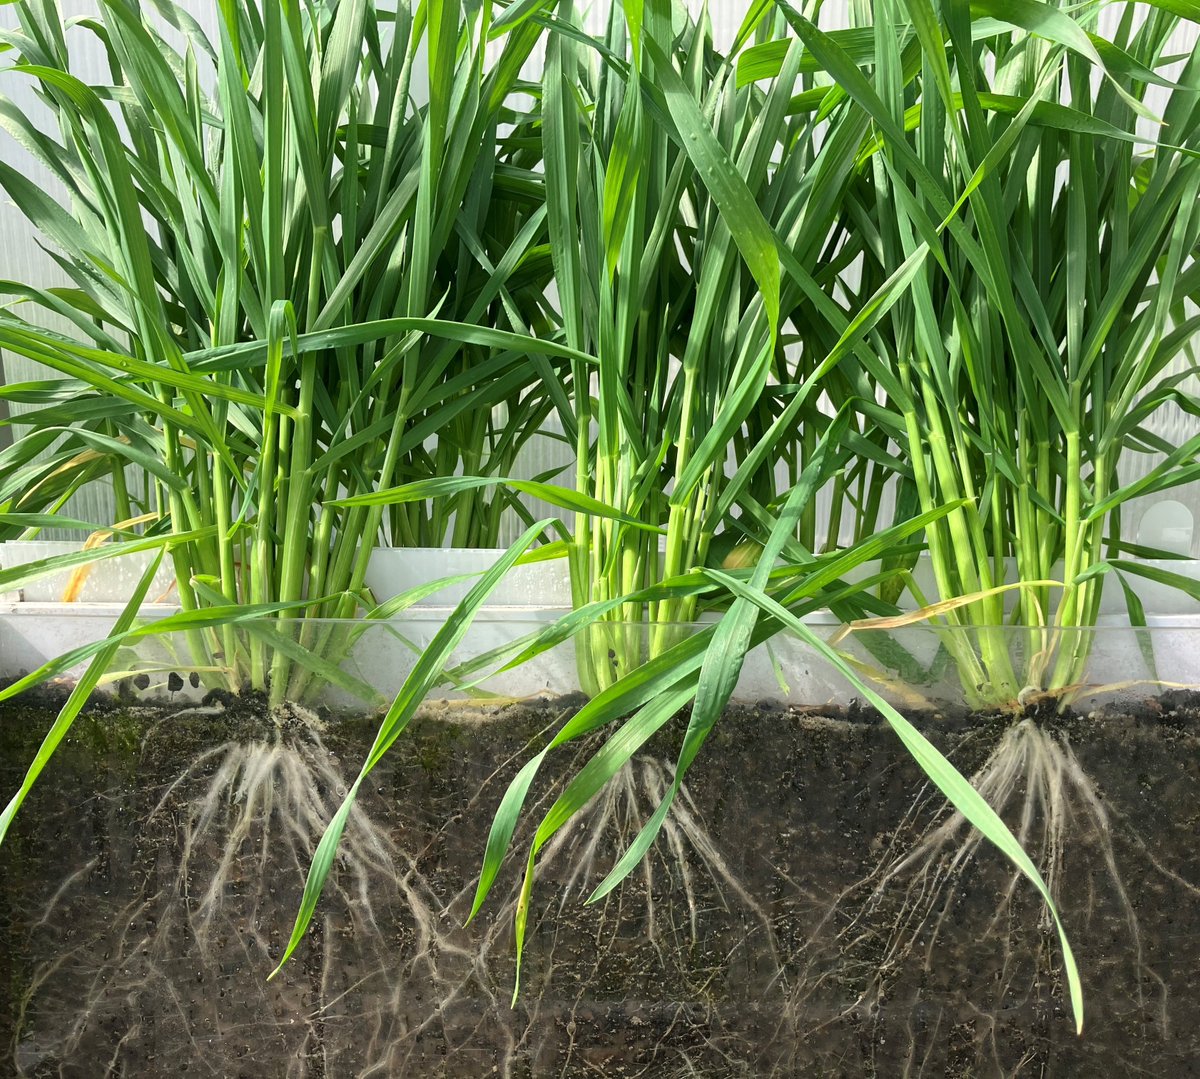 Pretty cool to see the speed & scale of wheat root development & interactions in real-time using new rhizoboxes in collaboration with the ANU node of @AustPlantPhenom 🌾